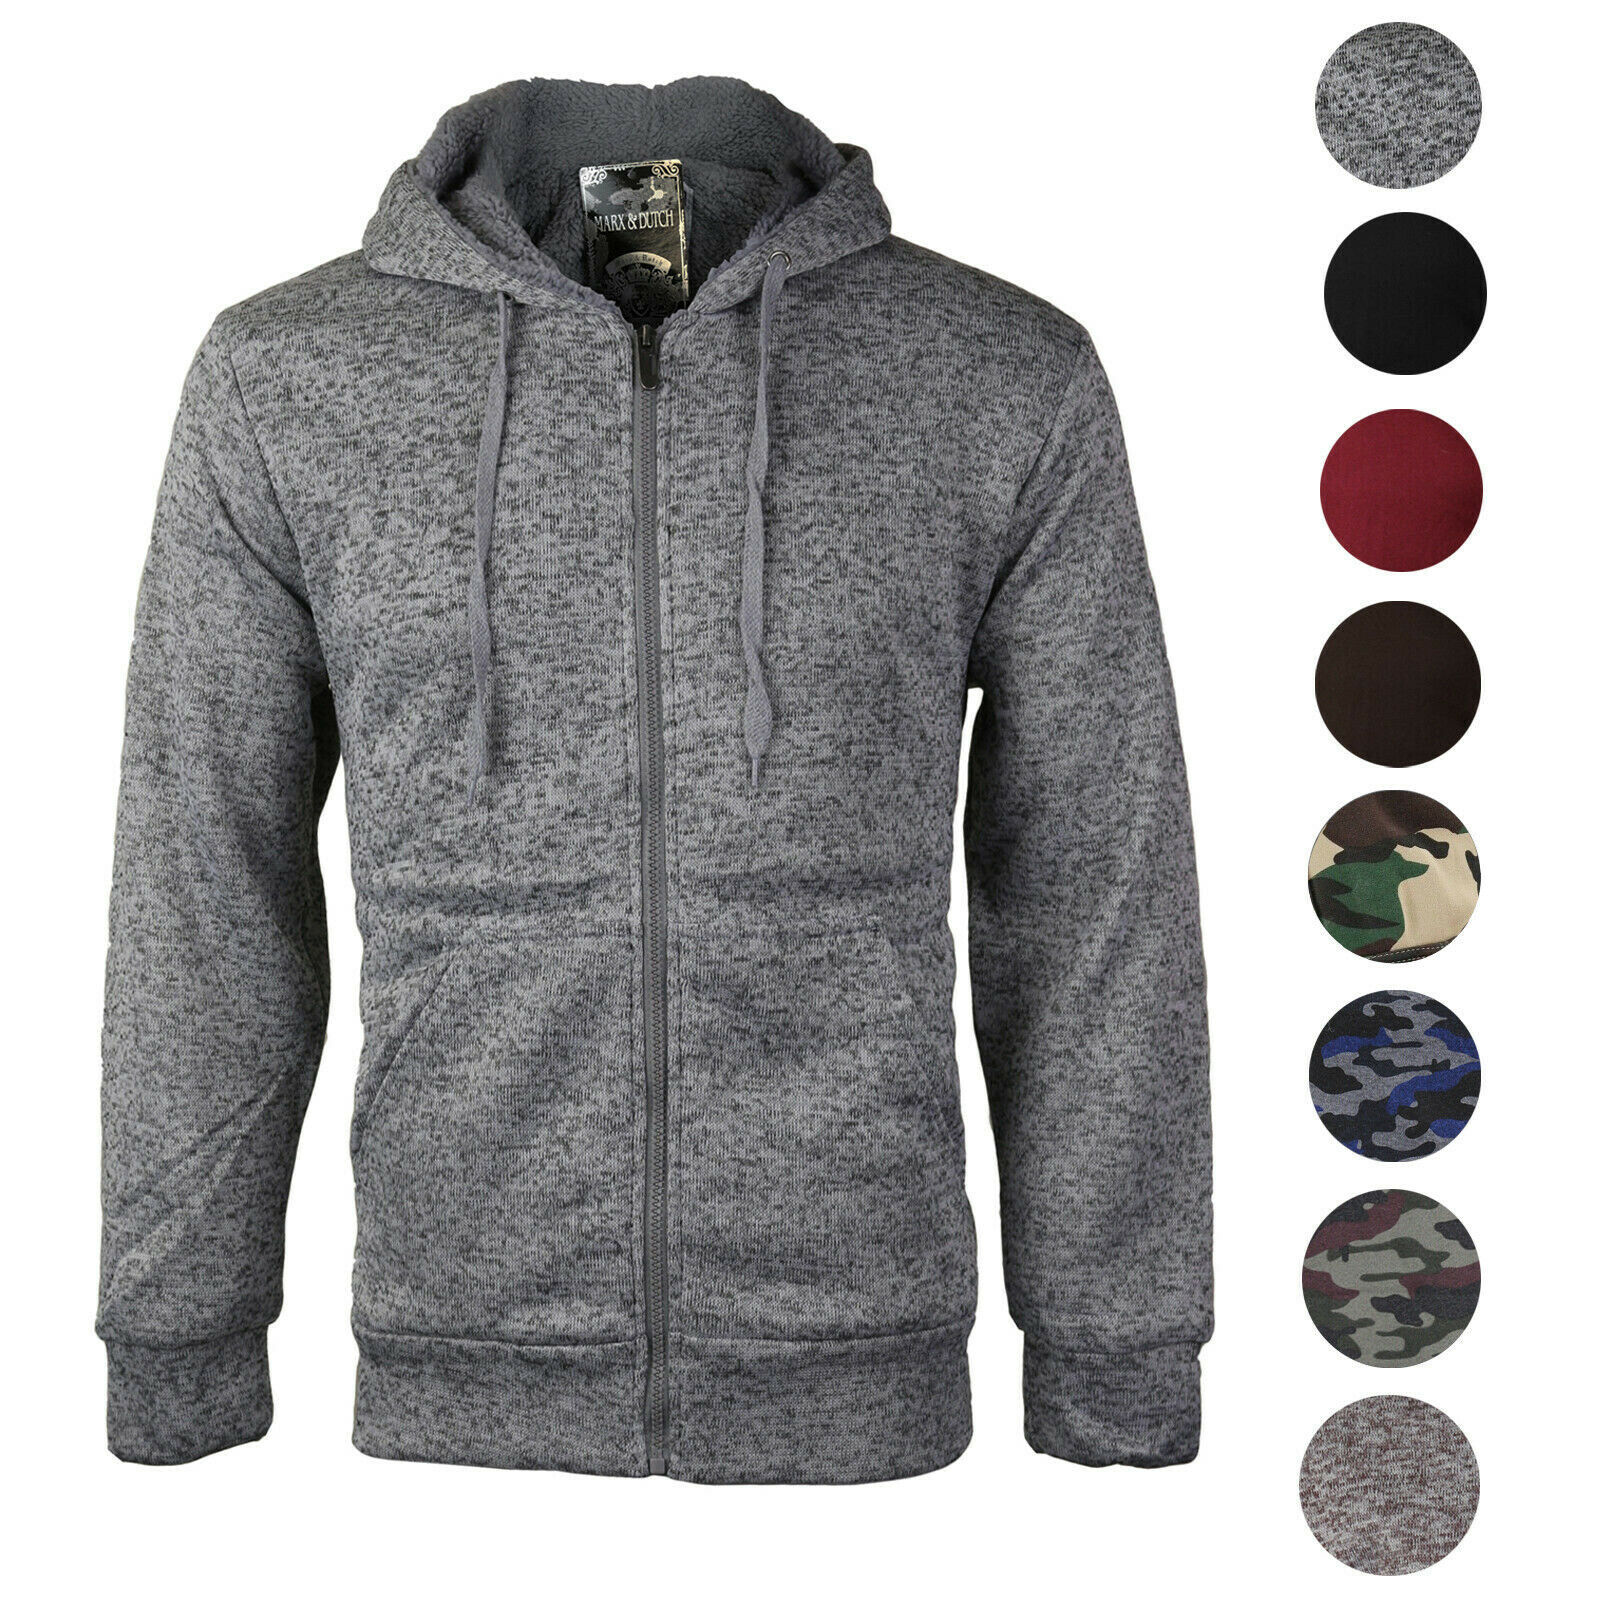 Primary image for Men's Premium Athletic Soft Sherpa Lined Fleece Zip Up Hoodie Sweater Jacket